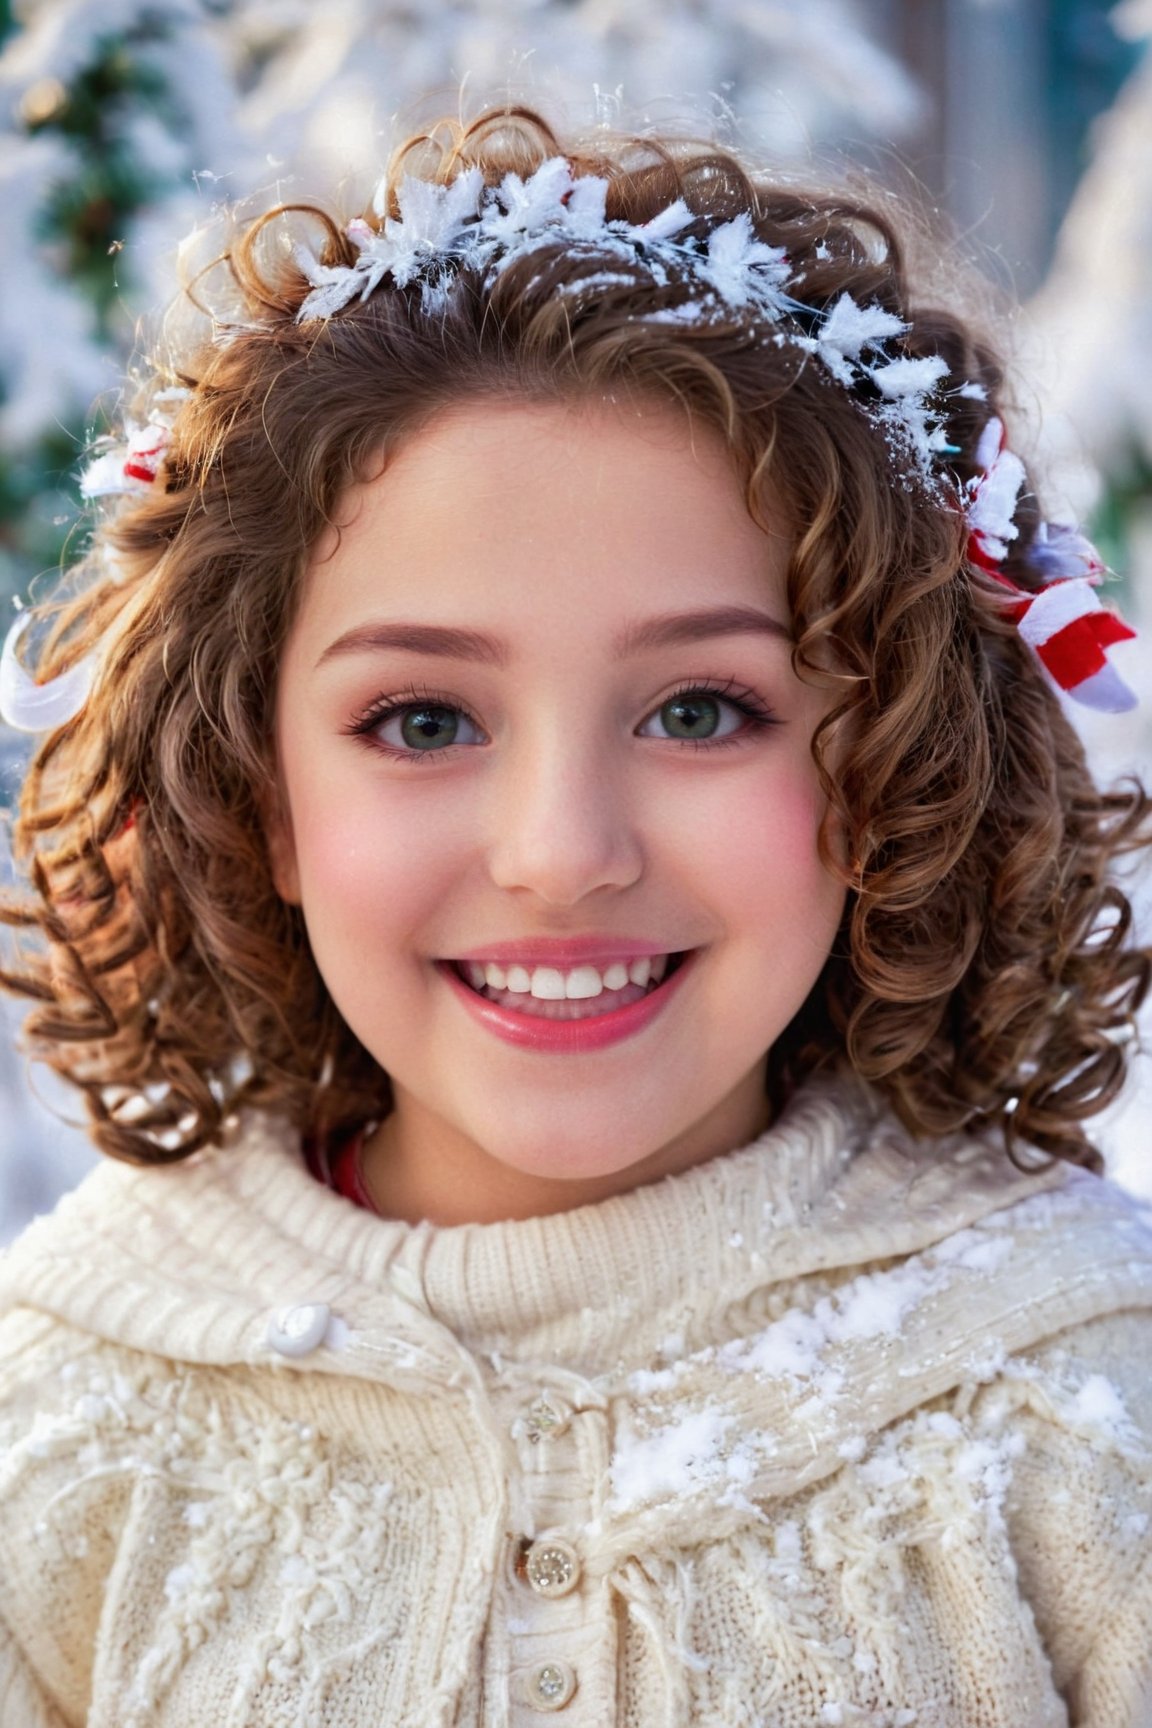 best quality,  cute little girl,  christmas outfit,  cute smiley,  blushing face,  detailed eyes,  detailed lips,  curly hair,  rosy cheeks,  sparkling eyes,  joyful expression,  snowy background,  winter scenery,  soft lighting,  vibrant colors,  festive atmosphere,<lora:EMS-74104-EMS:0.800000>